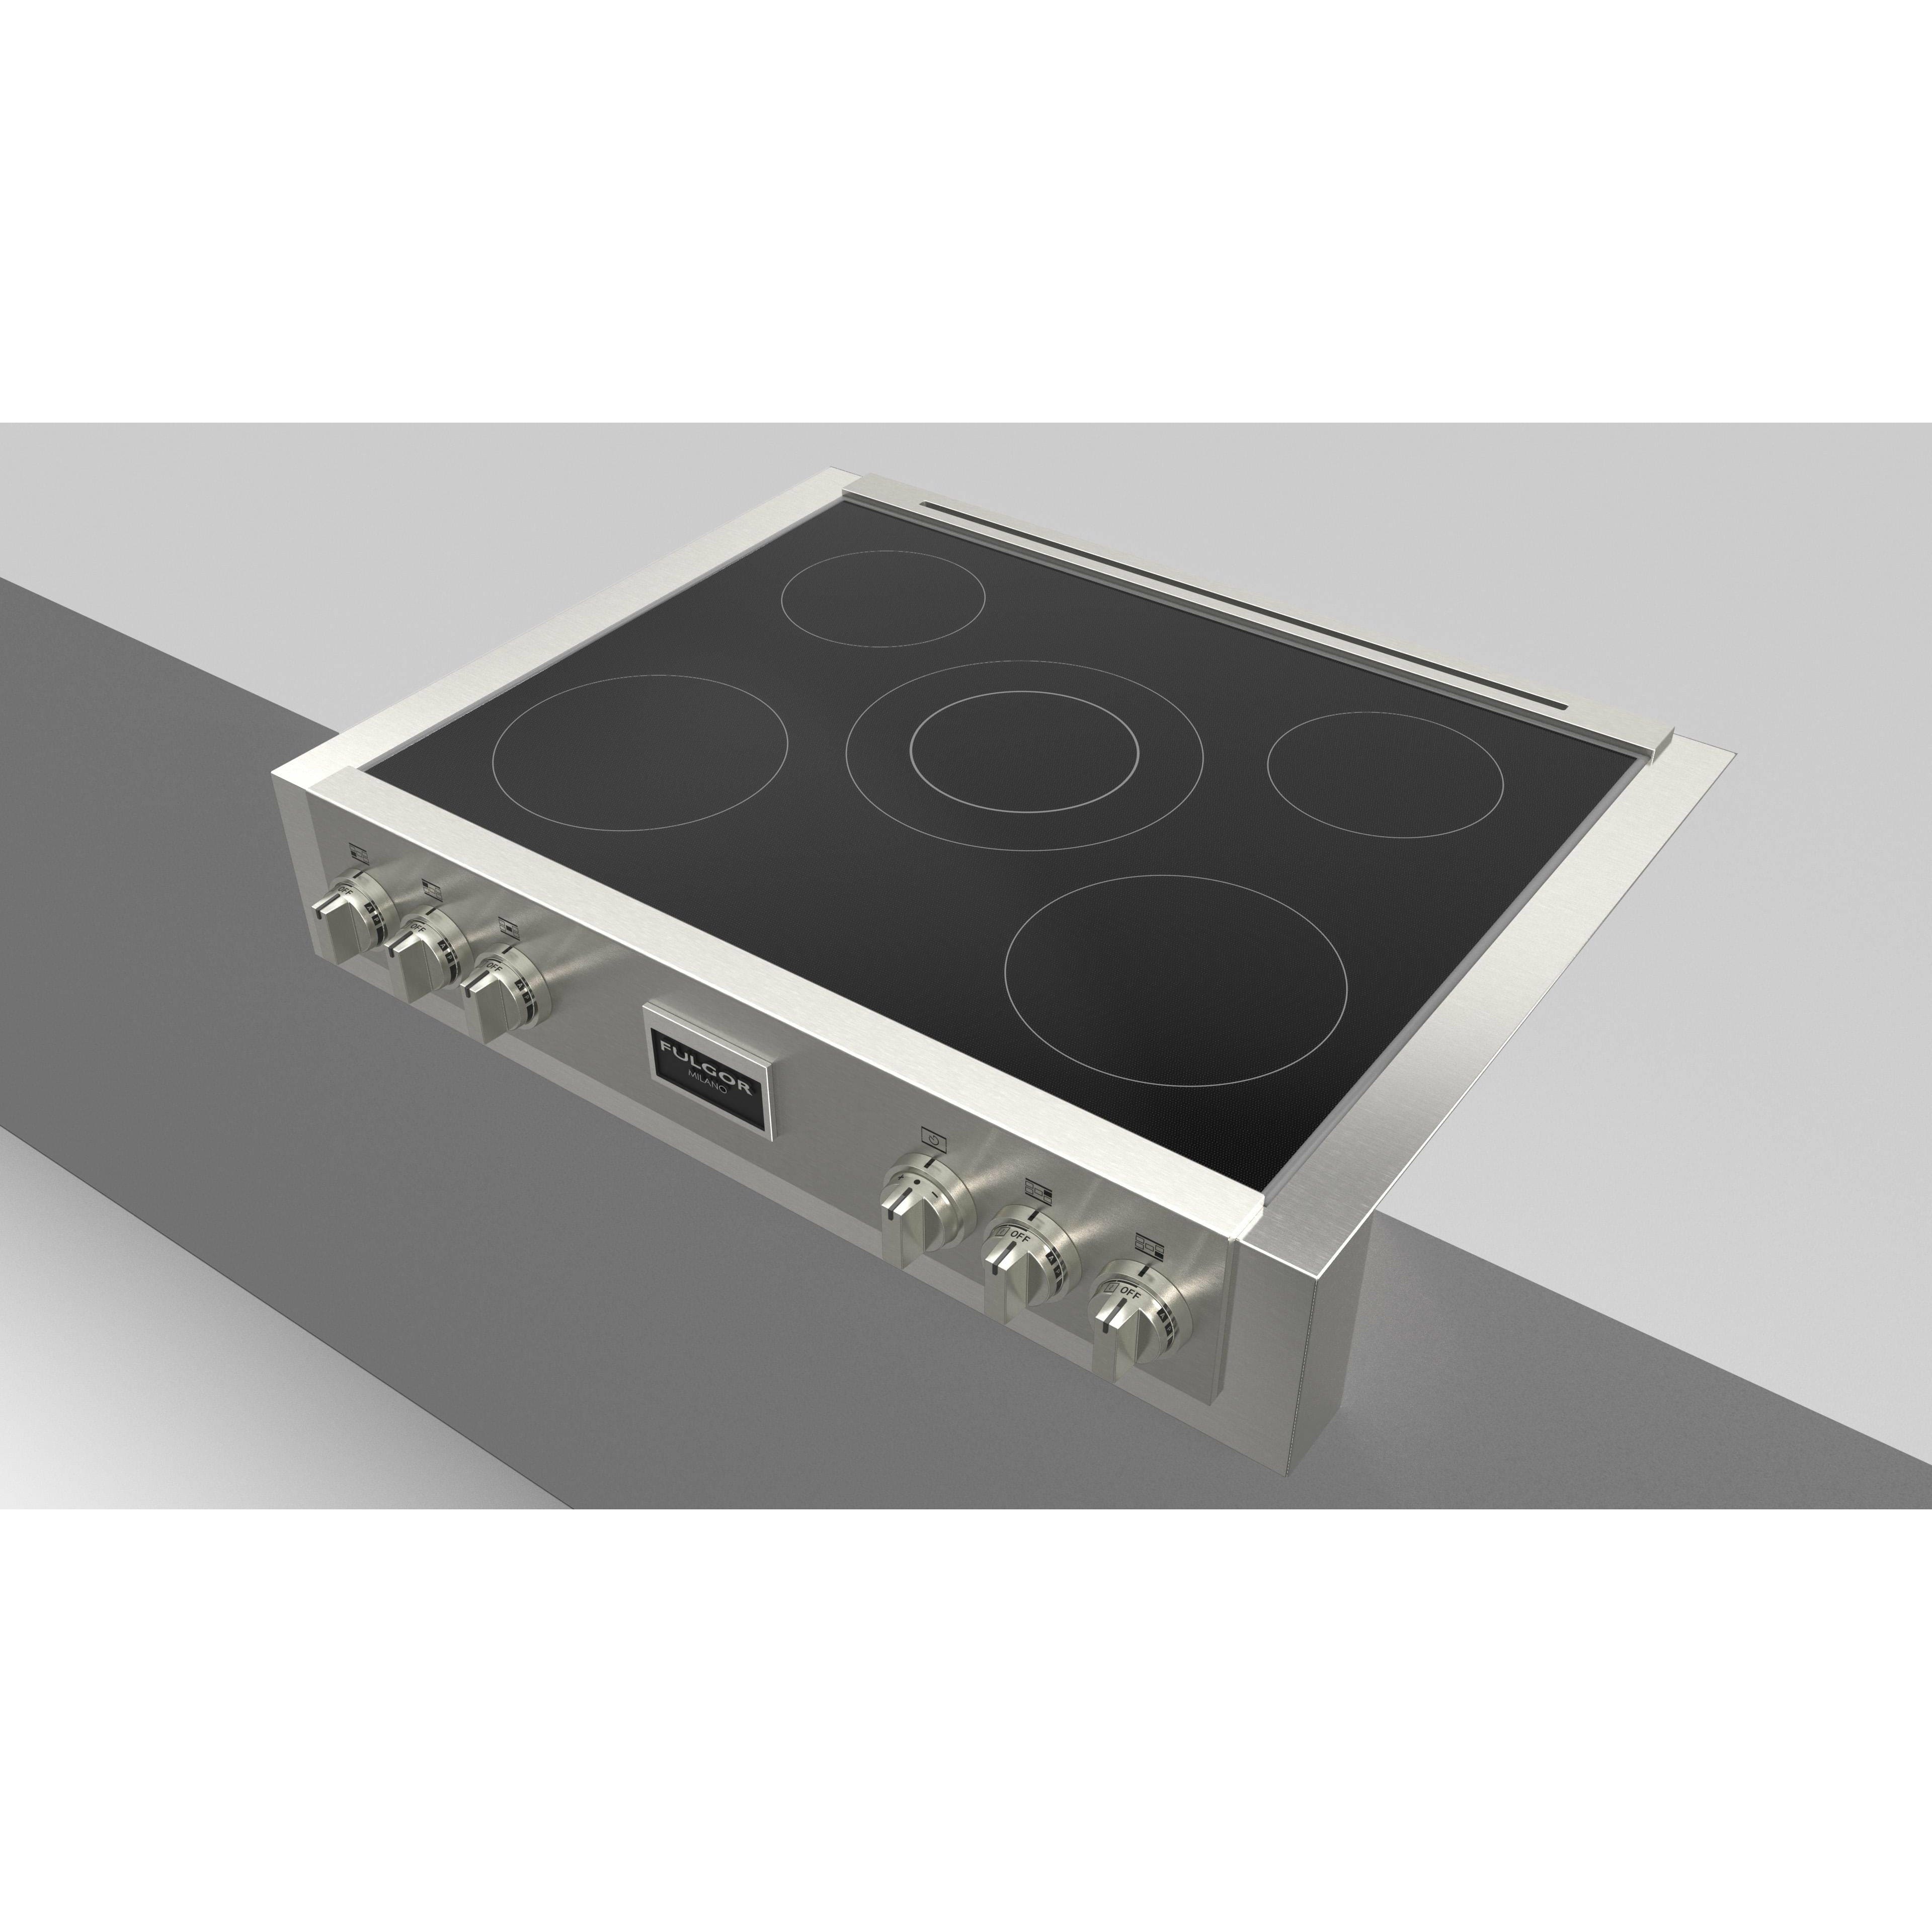 Fulgor Milano 36" Induction Rangetop with 5 Cooking Zones, Stainless Steel - F6IRT365S1 Rangetops F6IRT365S1 Luxury Appliances Direct